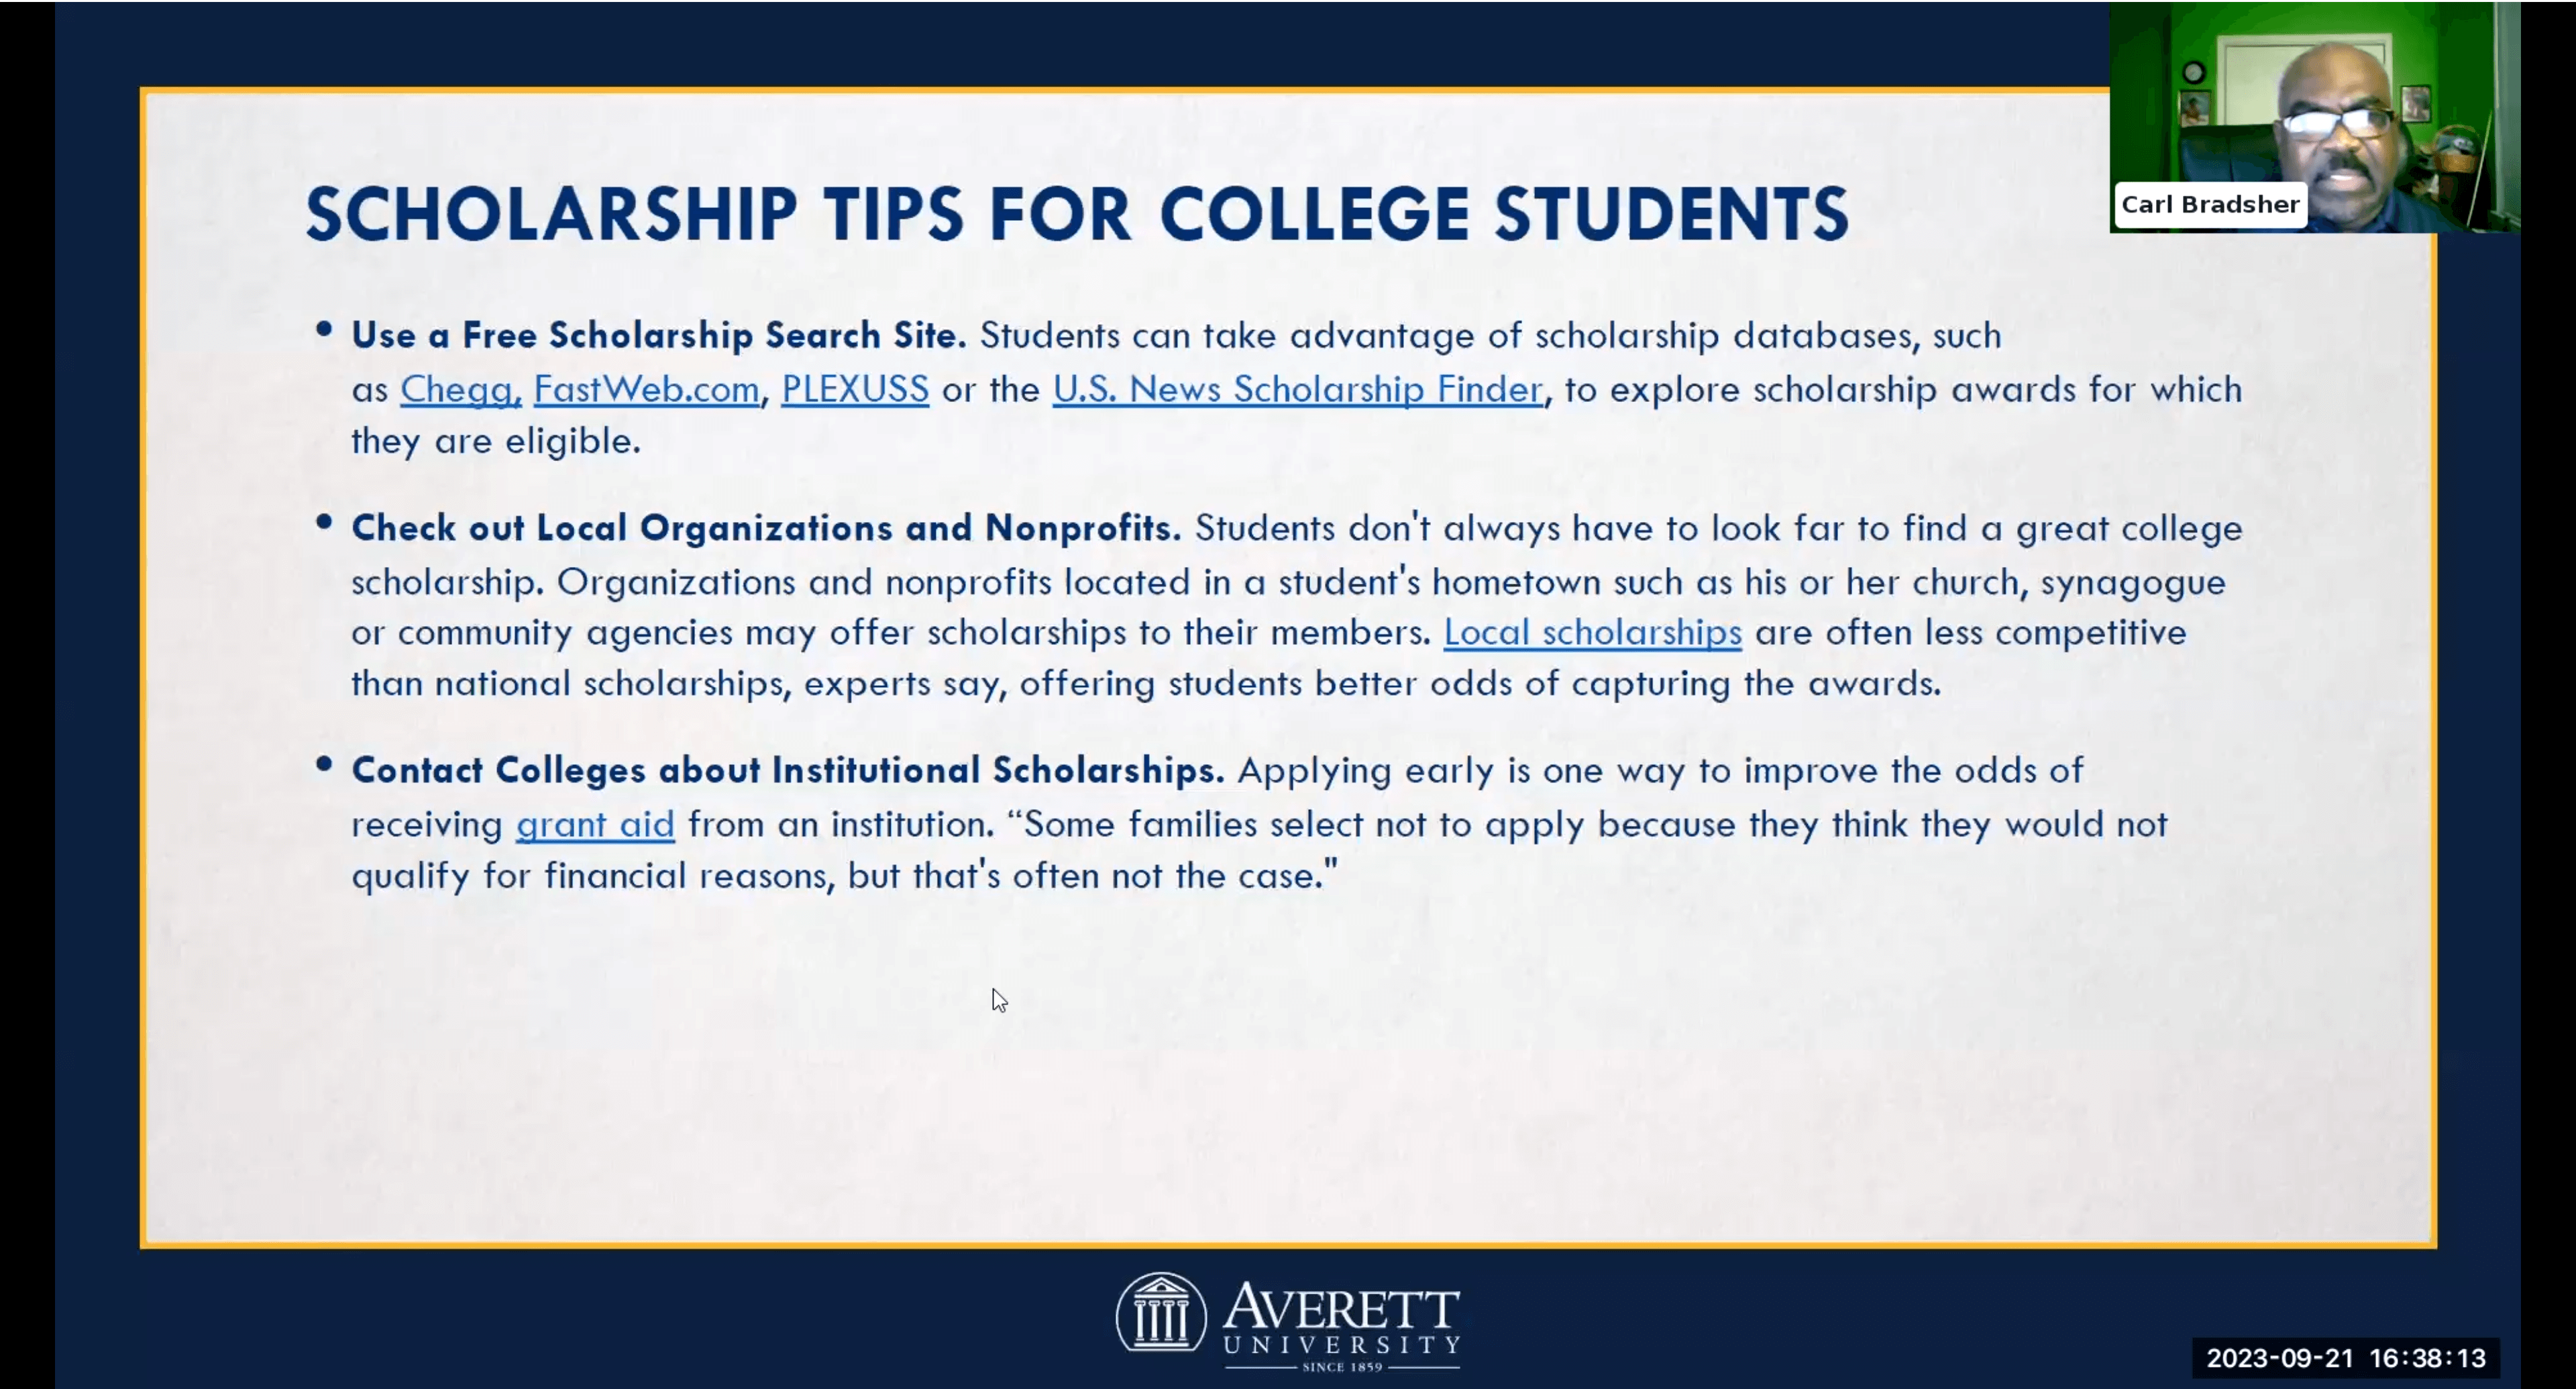 Scholarship tips: Use free search sites, check local organizations, and contact colleges for institu